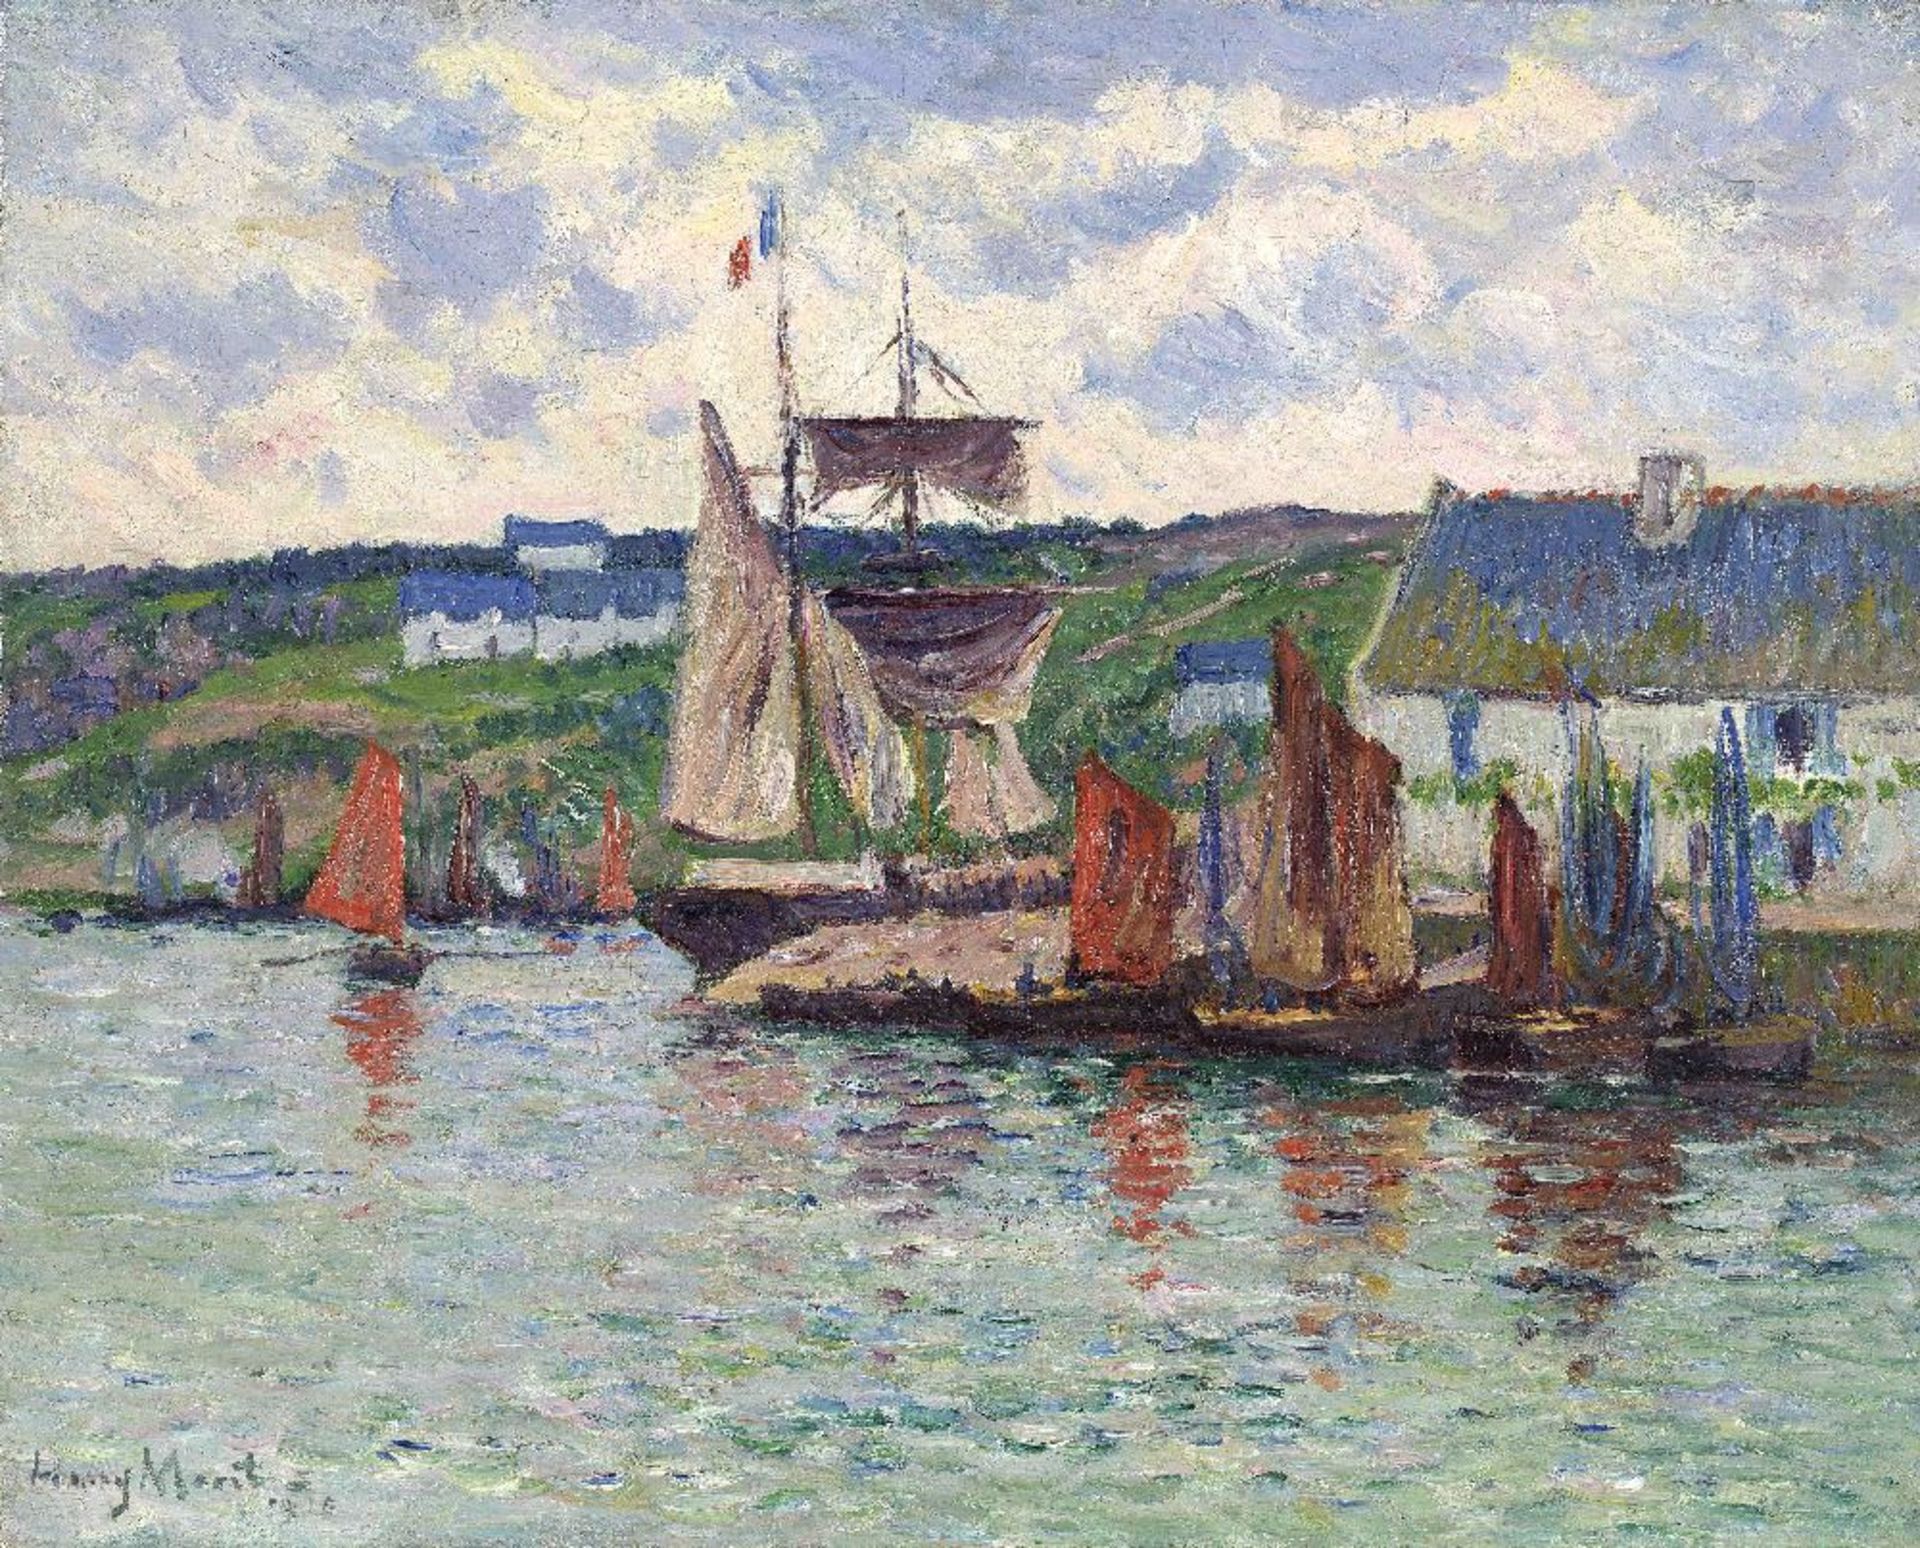 HENRY MORET (1856-1913) Marine (Painted in 1910)